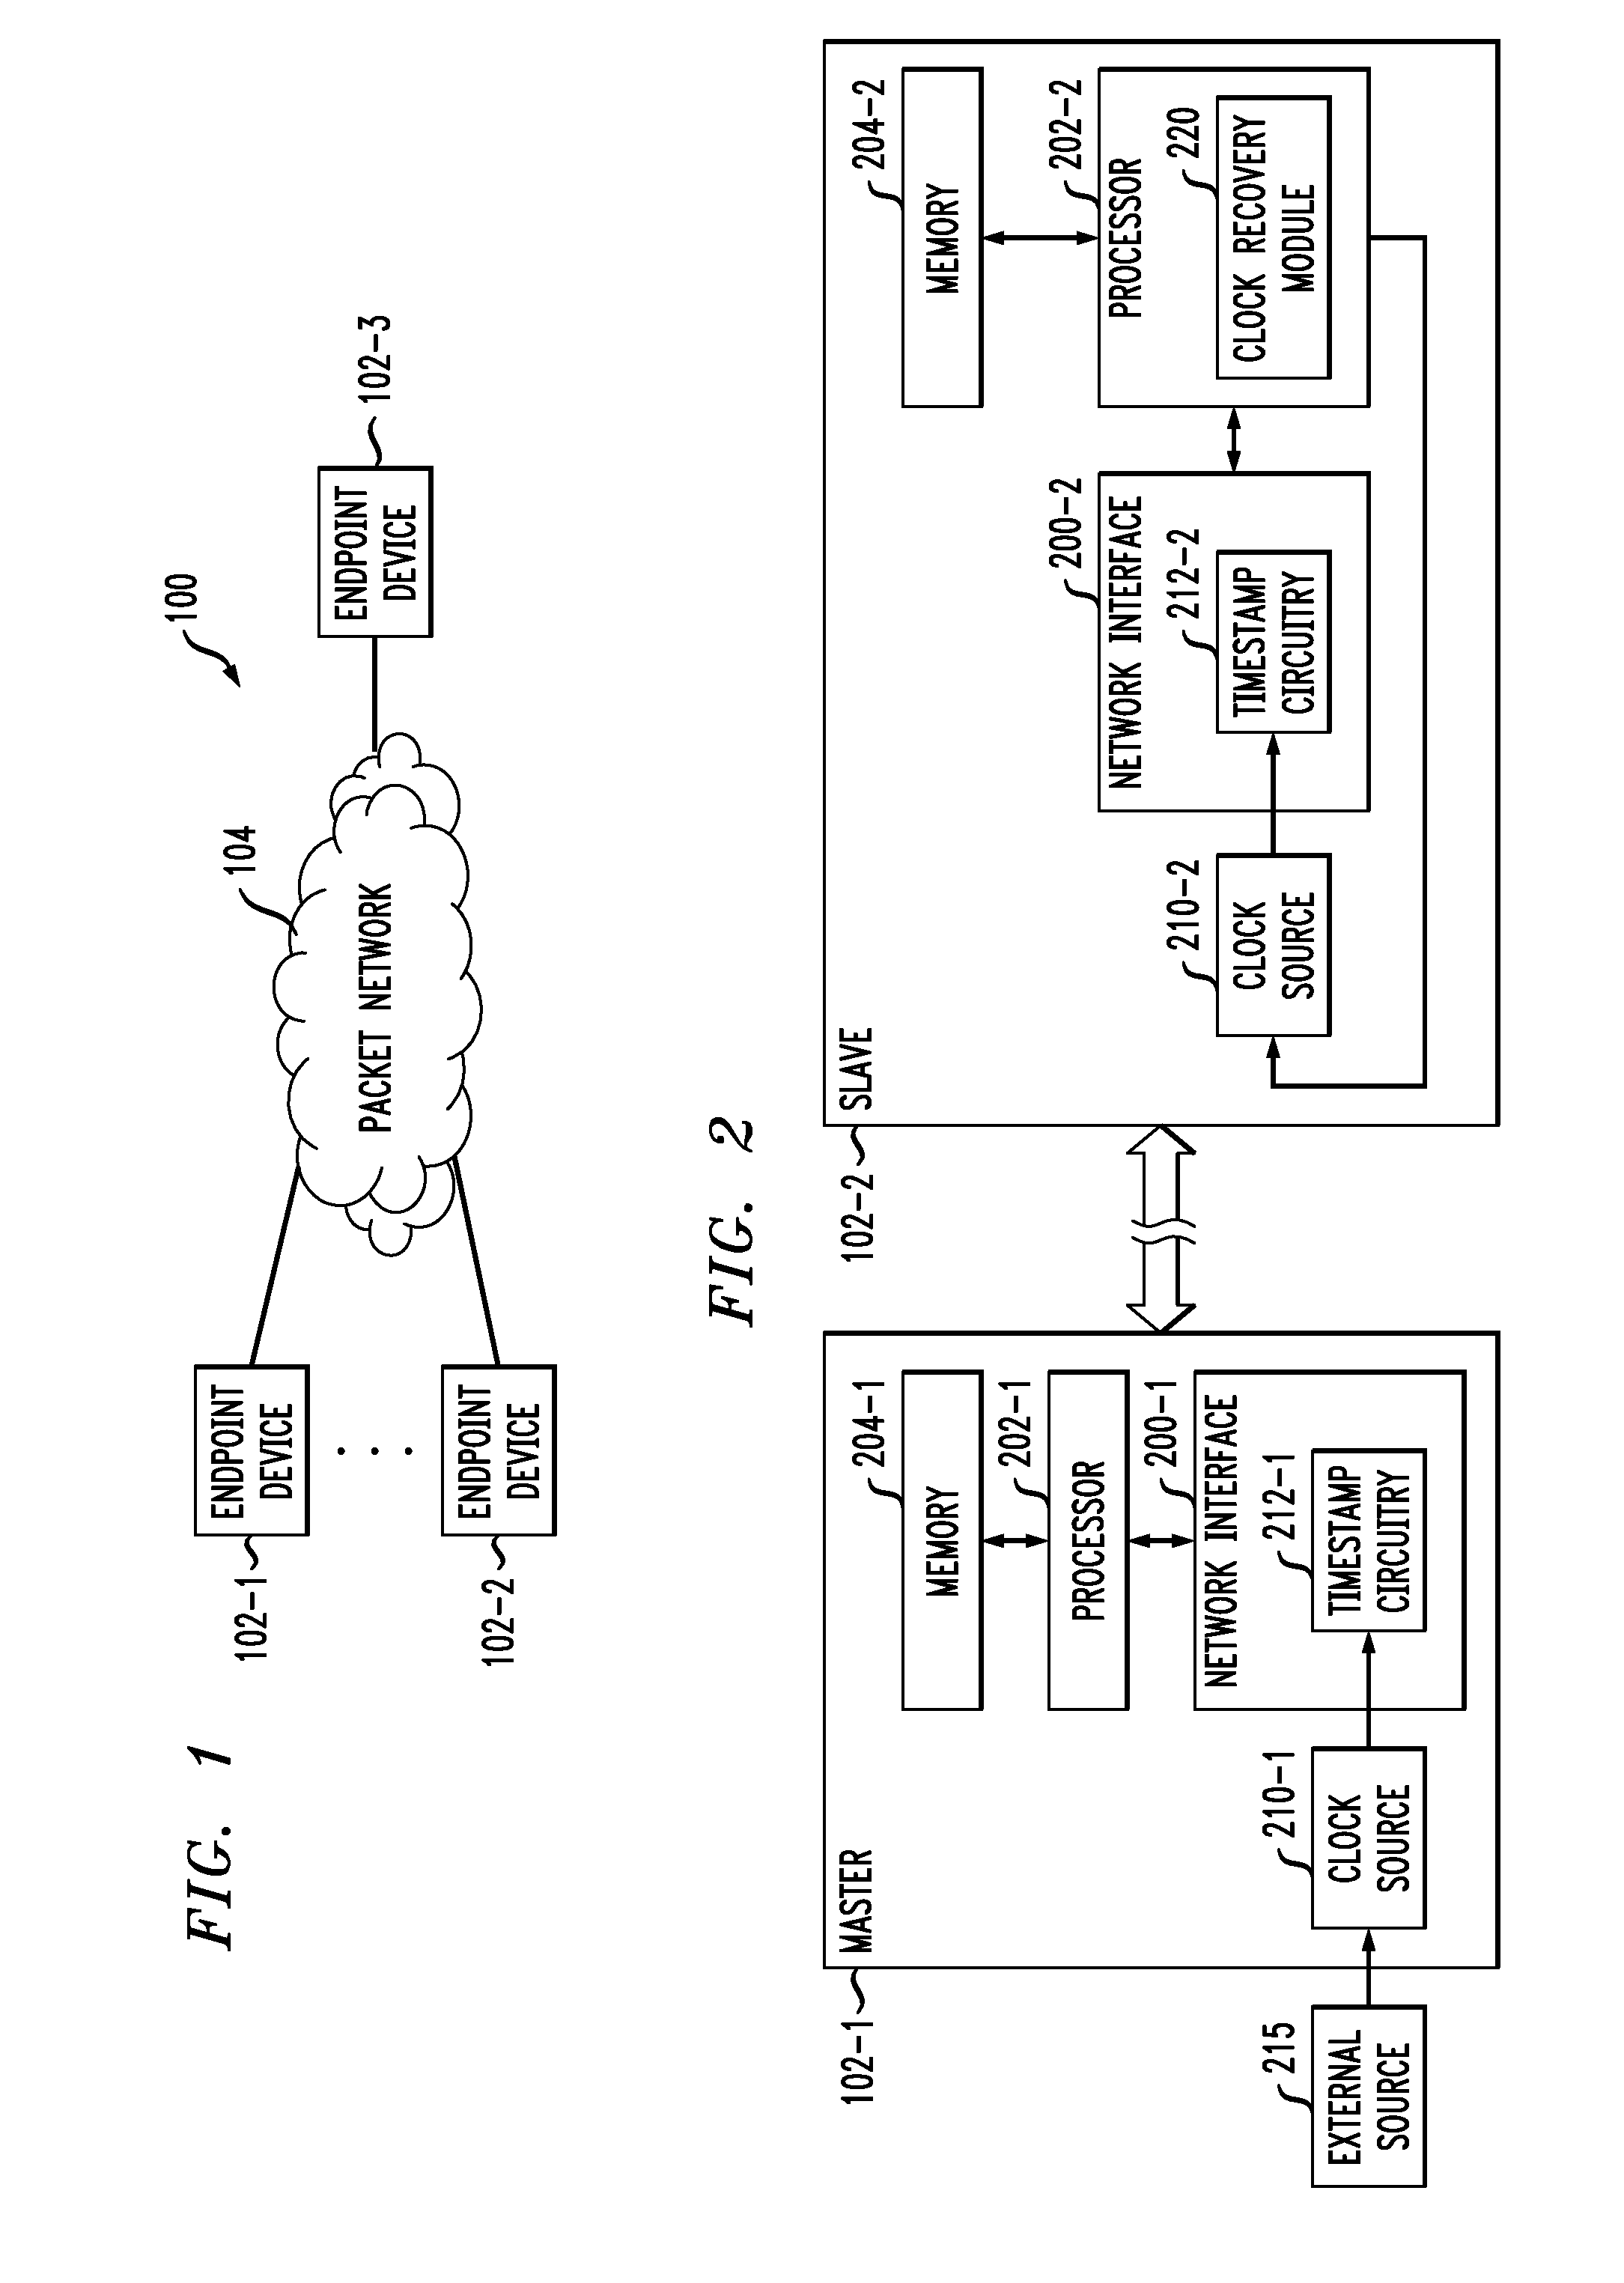 Method, Apparatus and System for Frequency Synchronization Between Devices Communicating over a Packet Network